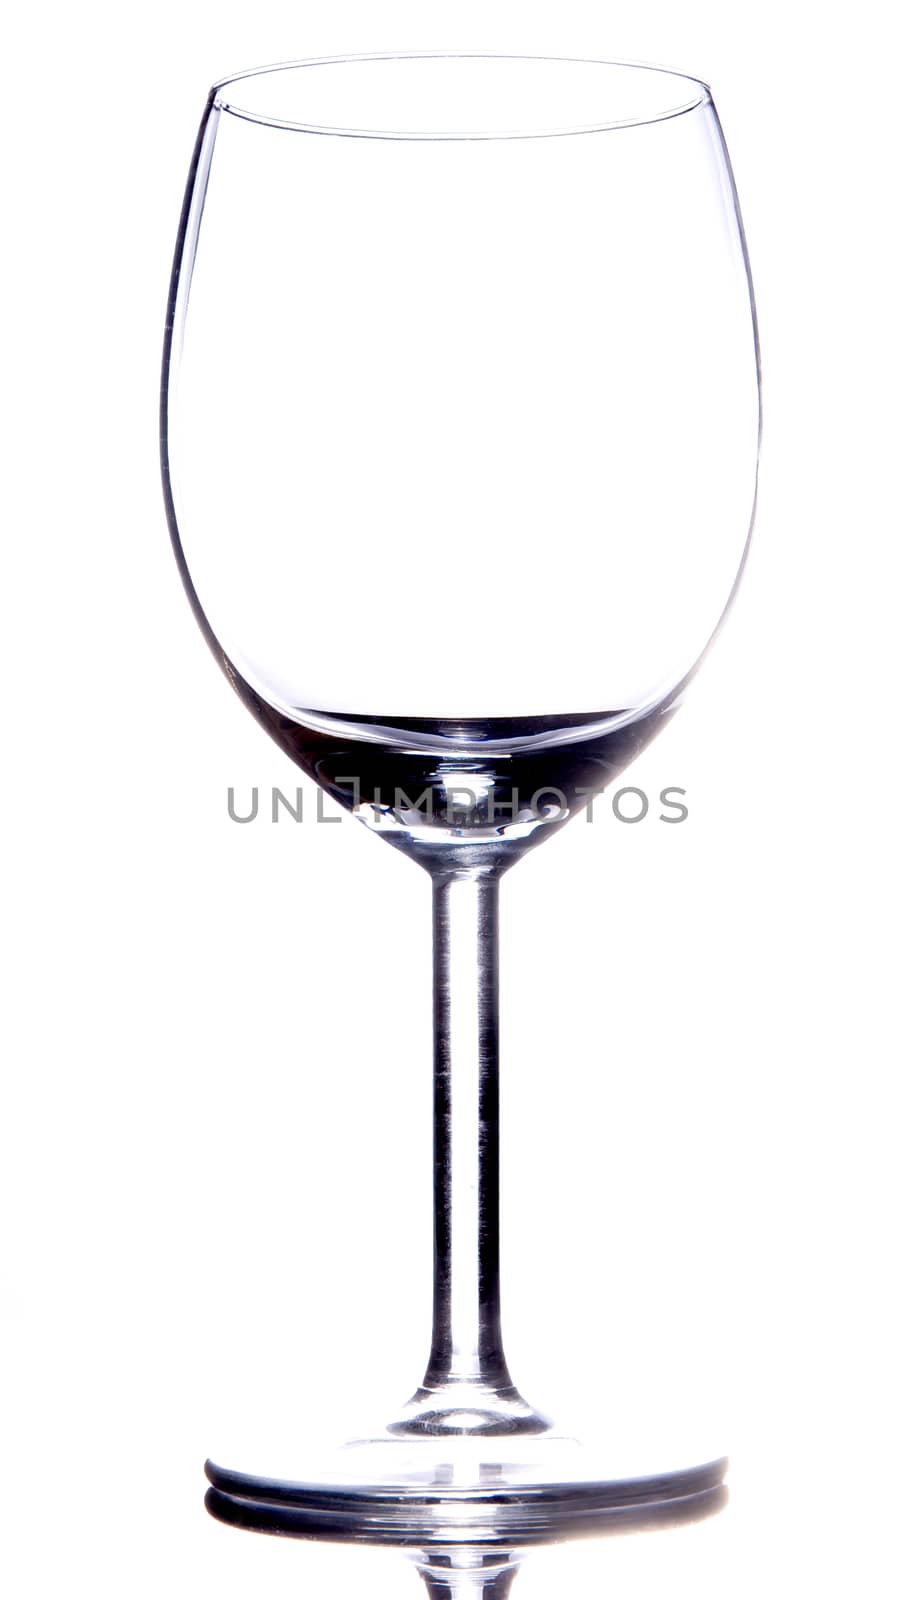 Empty vine glass on white by anderm